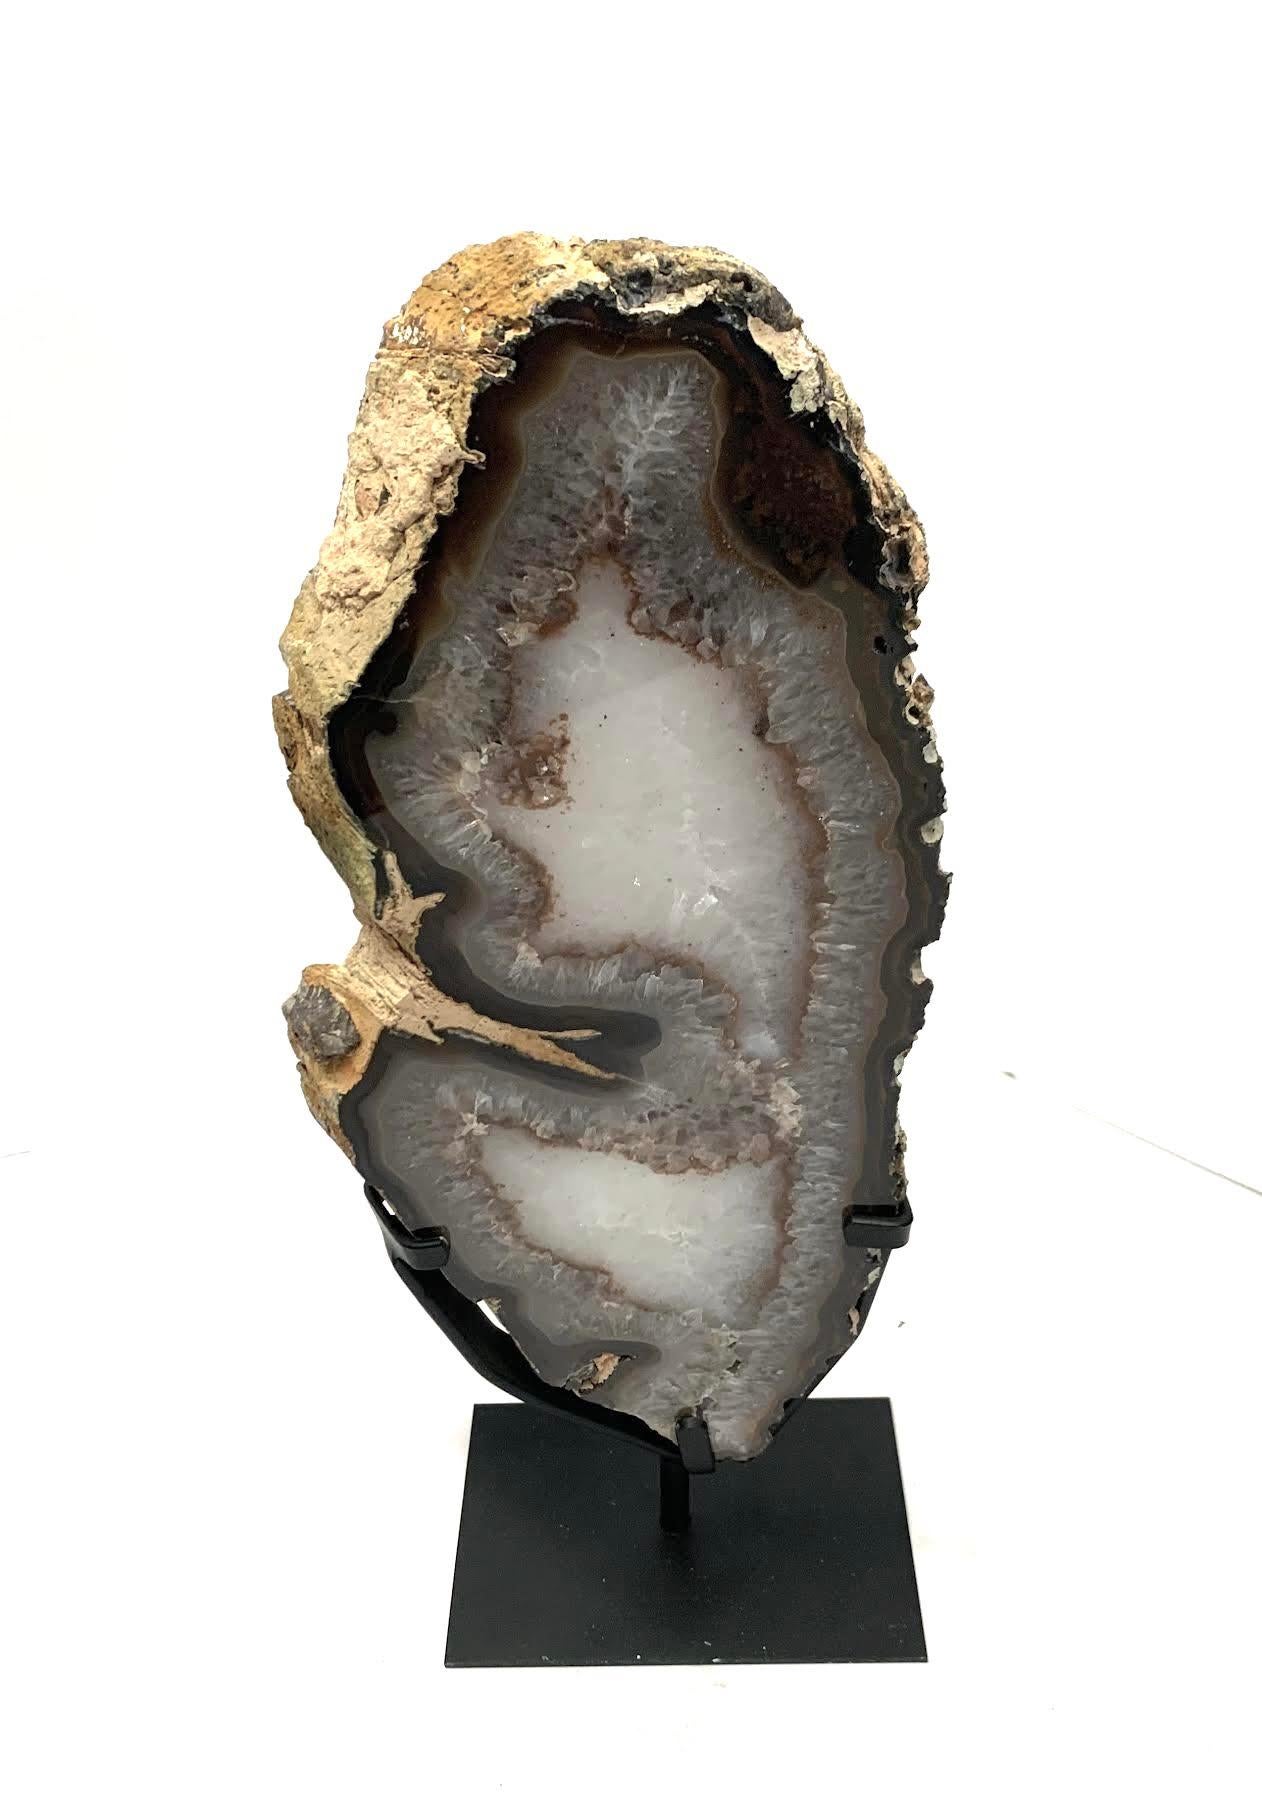 Prehistoric Brazilian agate geode on stand.
White, taupe with a thin rust line.
Metal stand measures 6